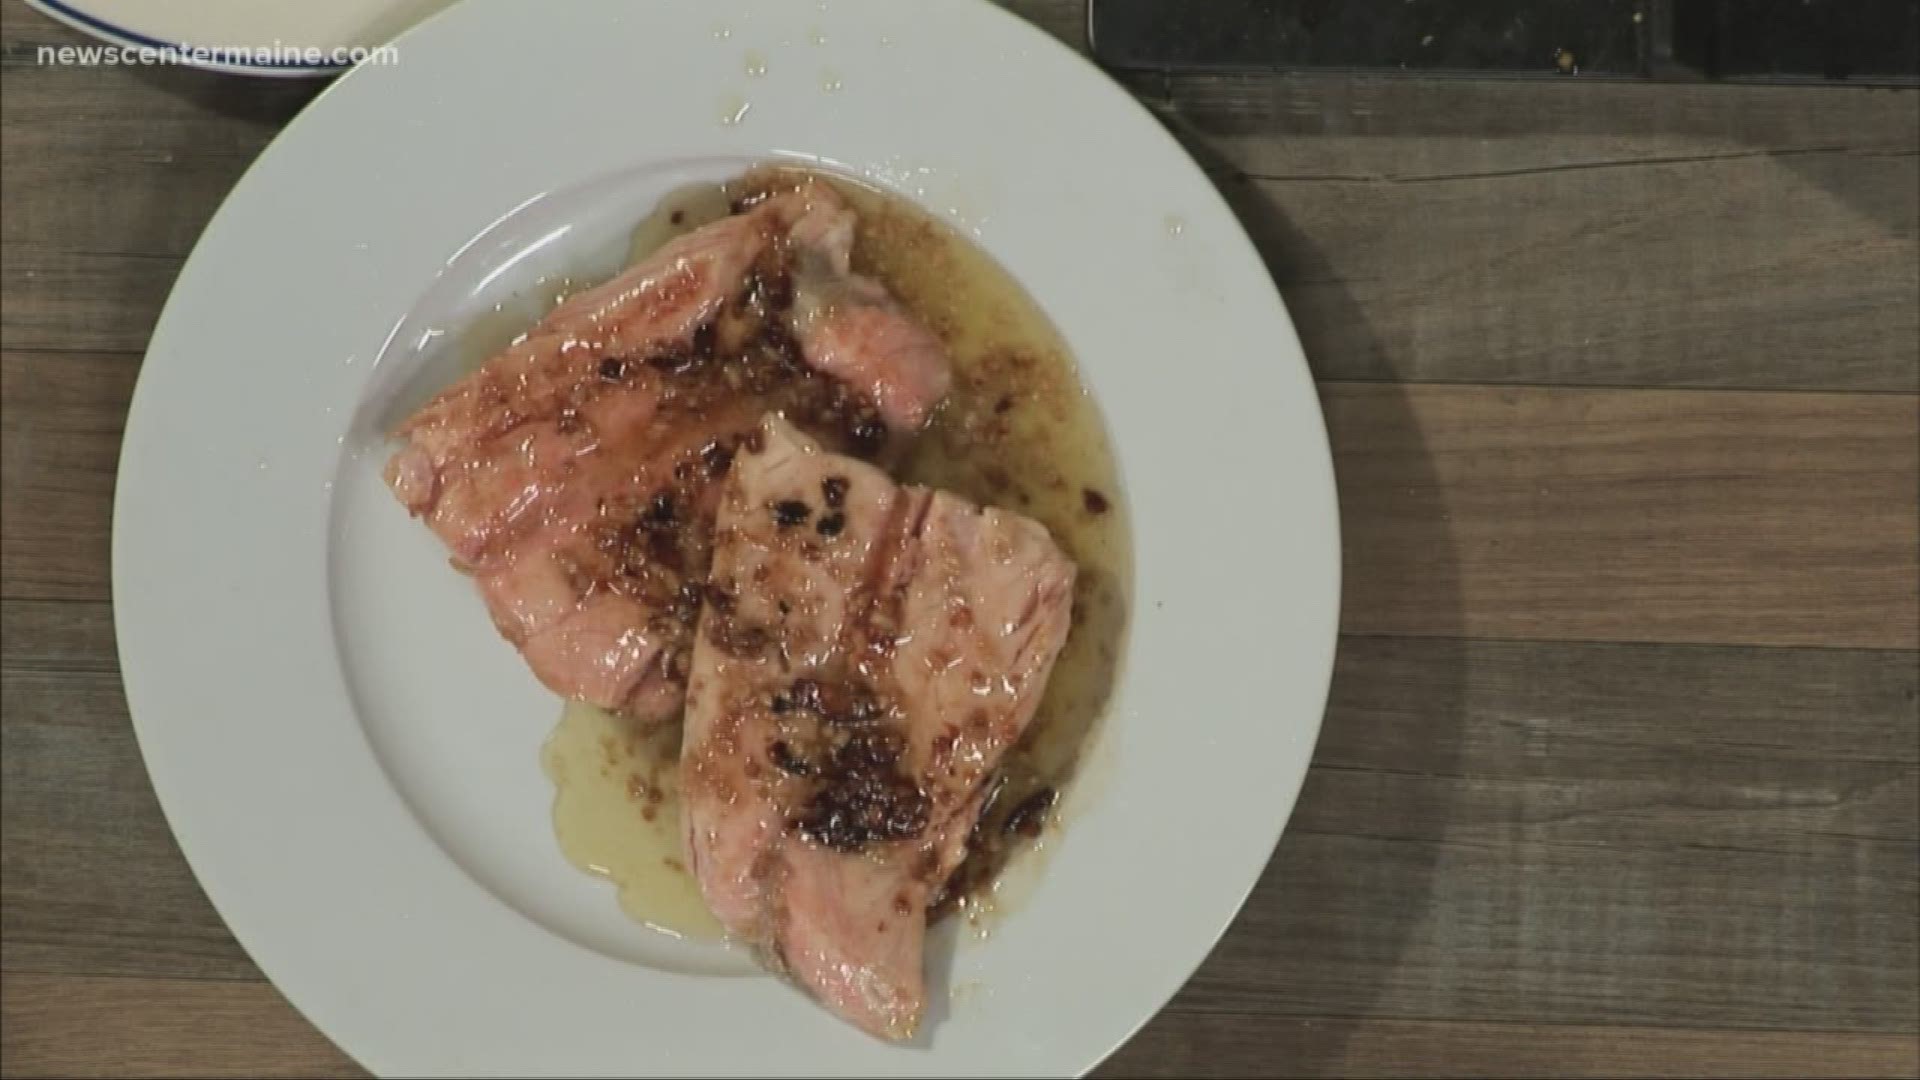 We're in the kitchen with Rockland chef and business owner Lynn Archer. Seafood is her specialty, and she's showing us her take on a simple salmon dish.